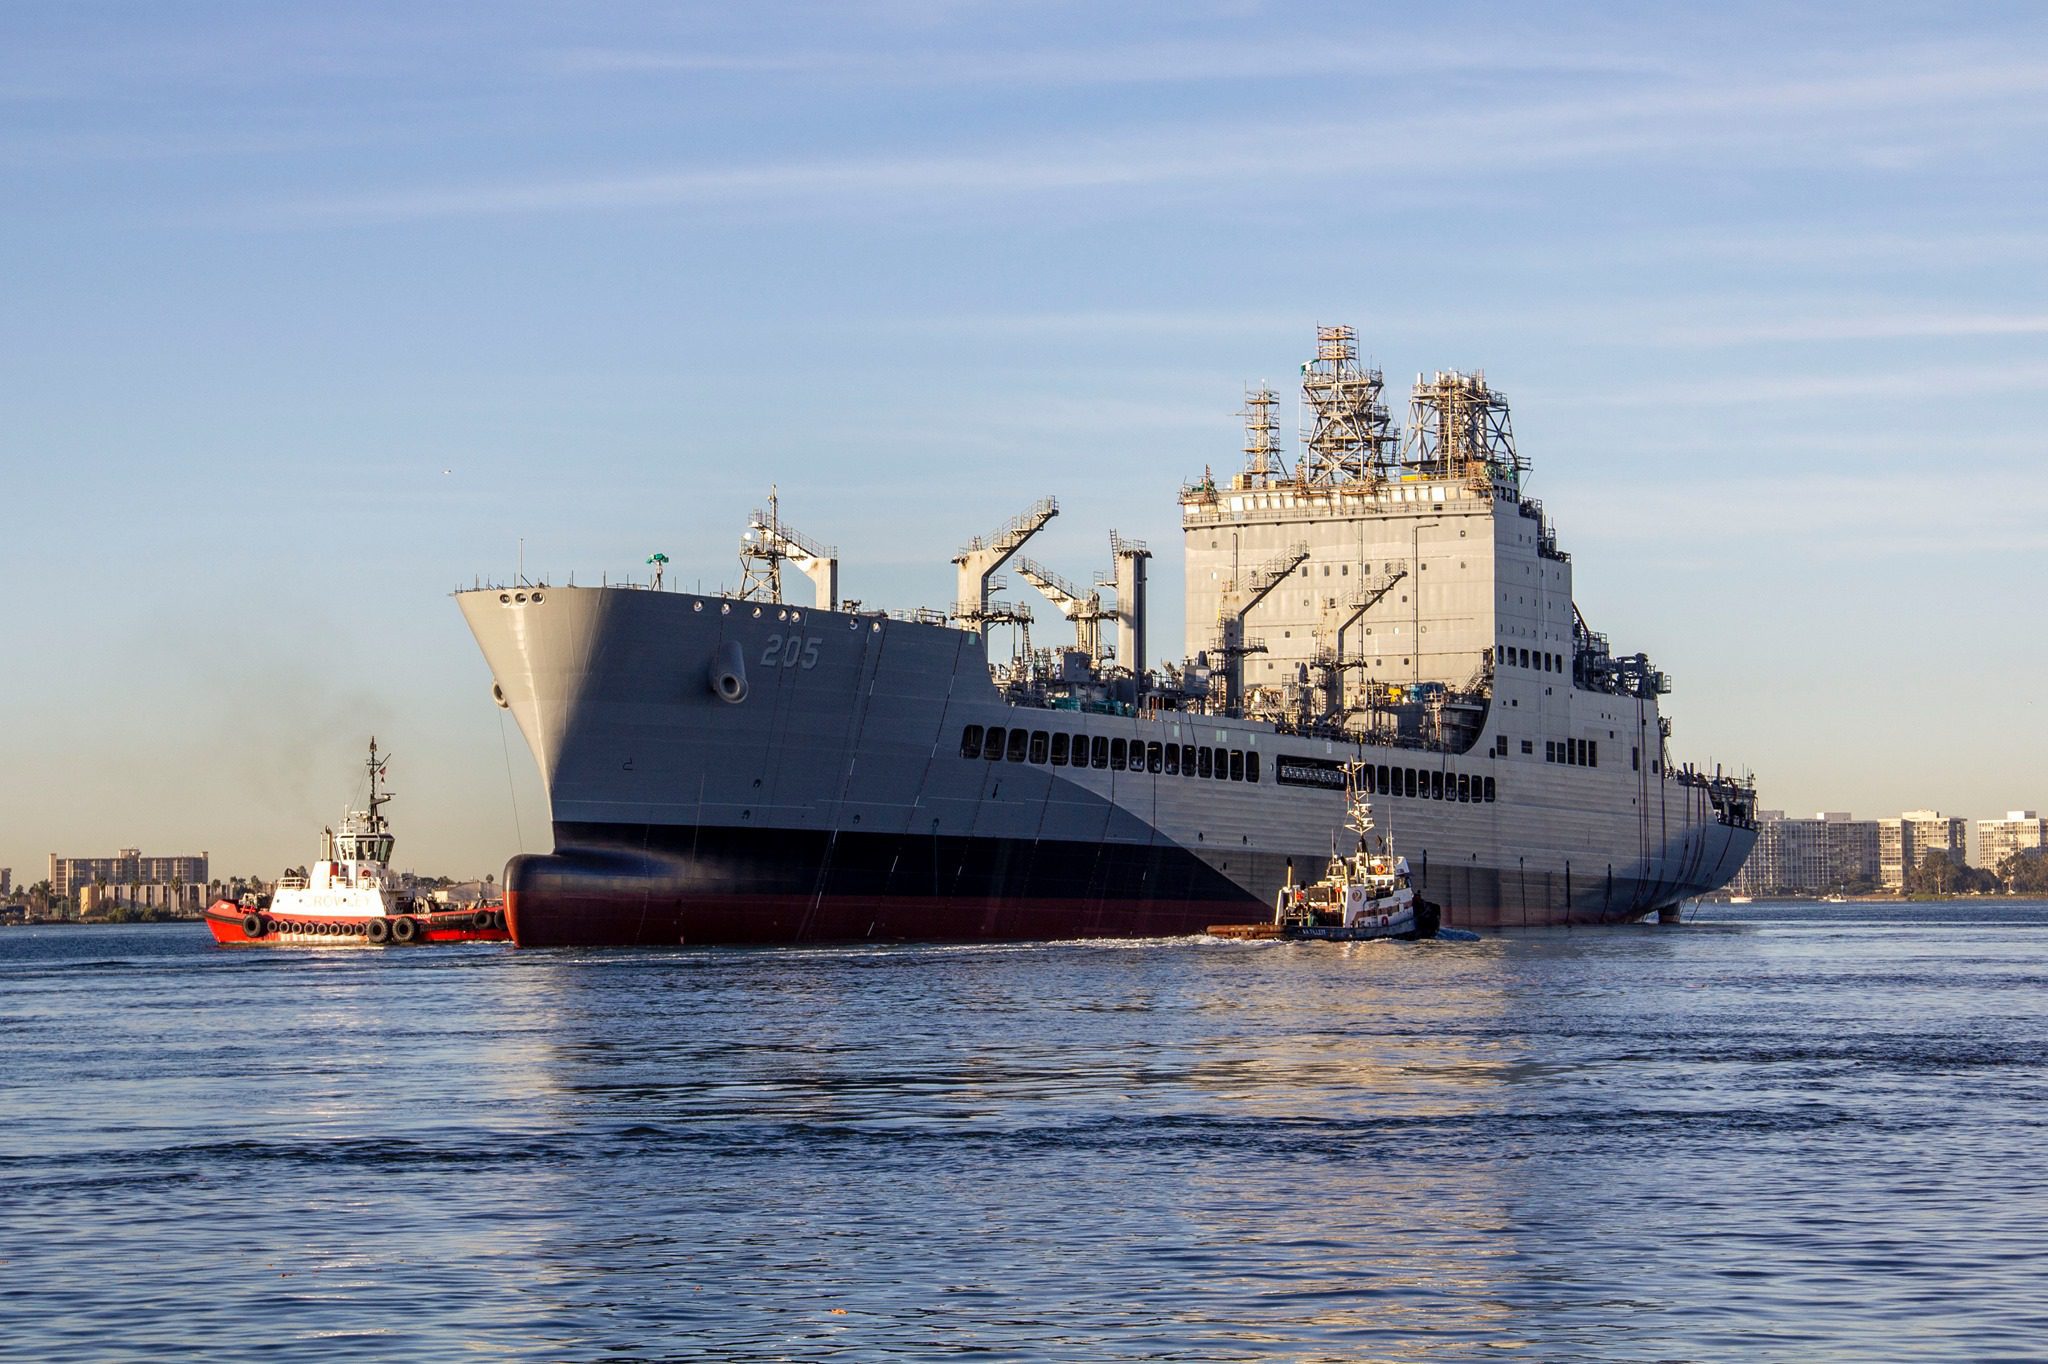 U.S. Navy’s First John Lewis-Class Oiler Launched at NASSCO